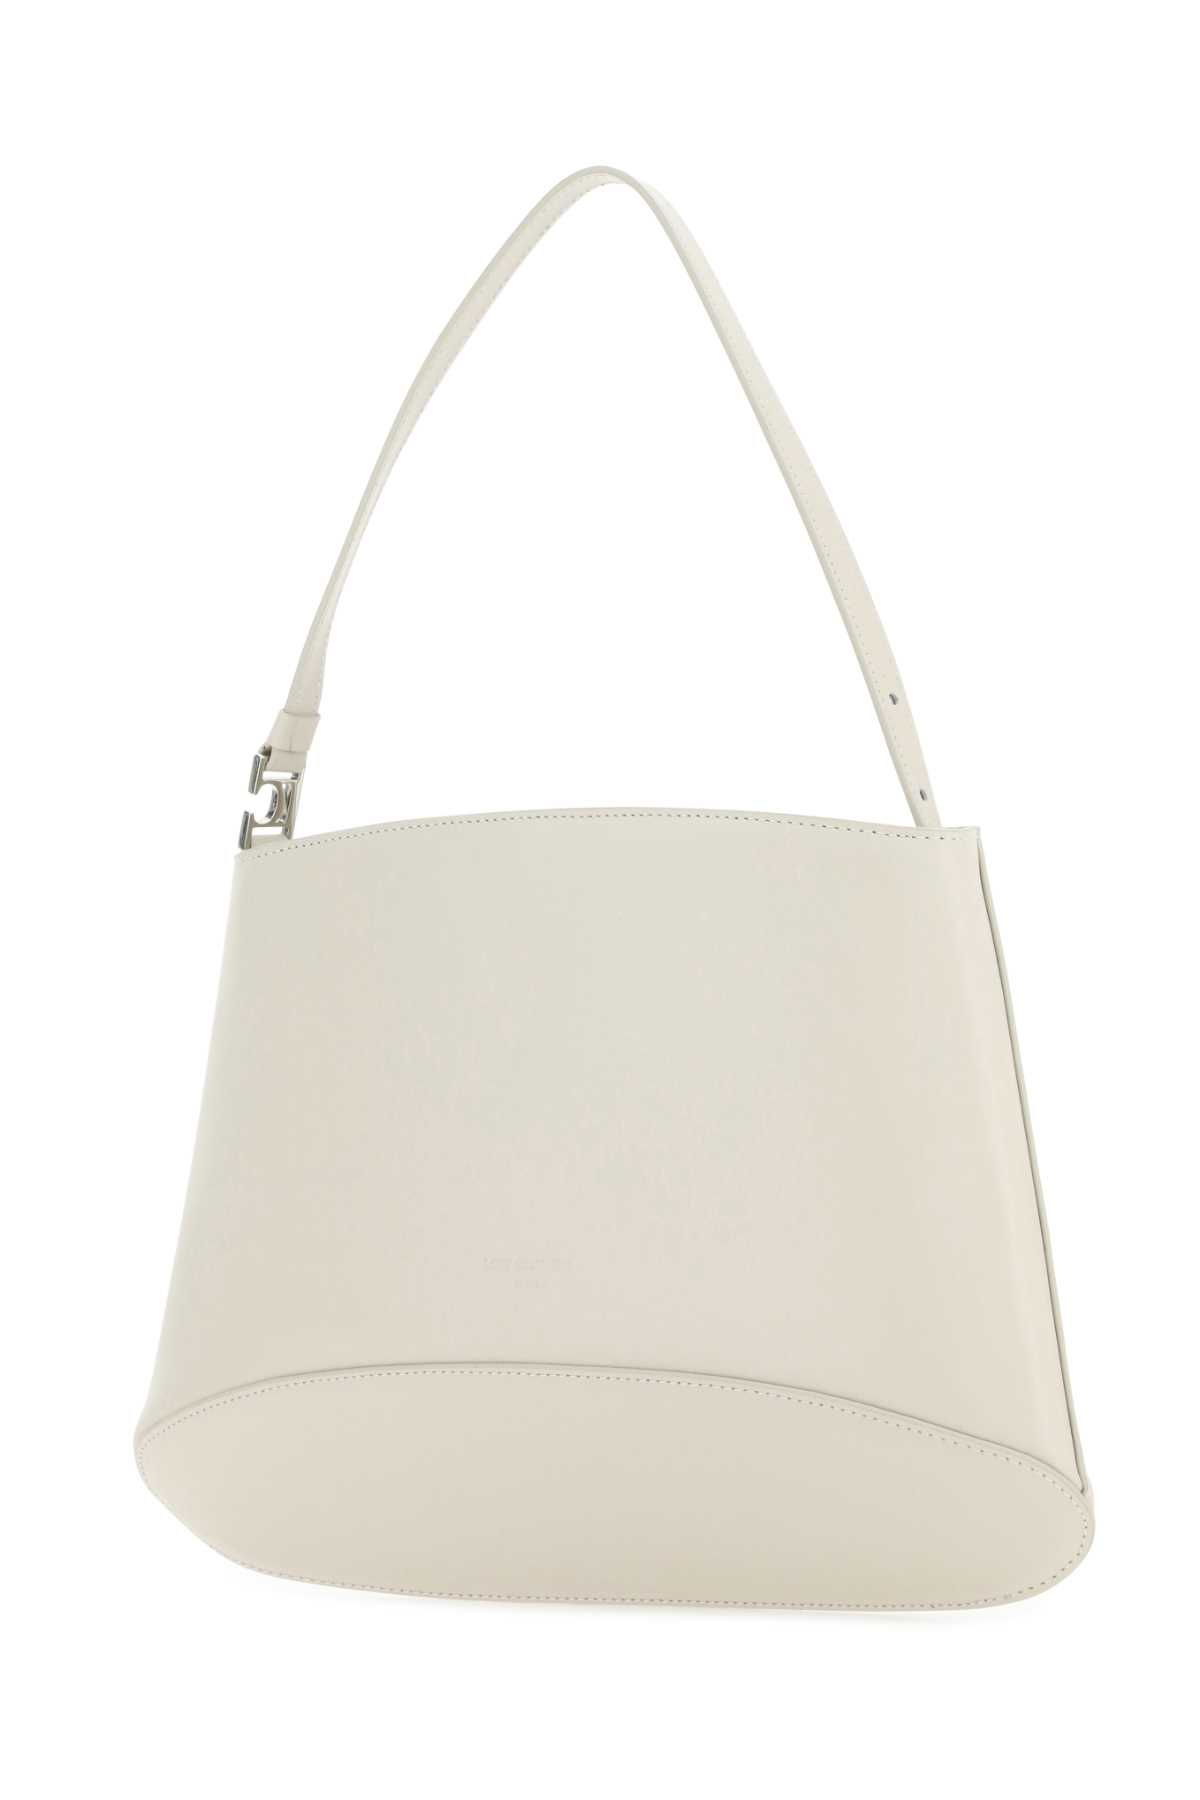 Low Classic Ivory Leather Handbag In 0813